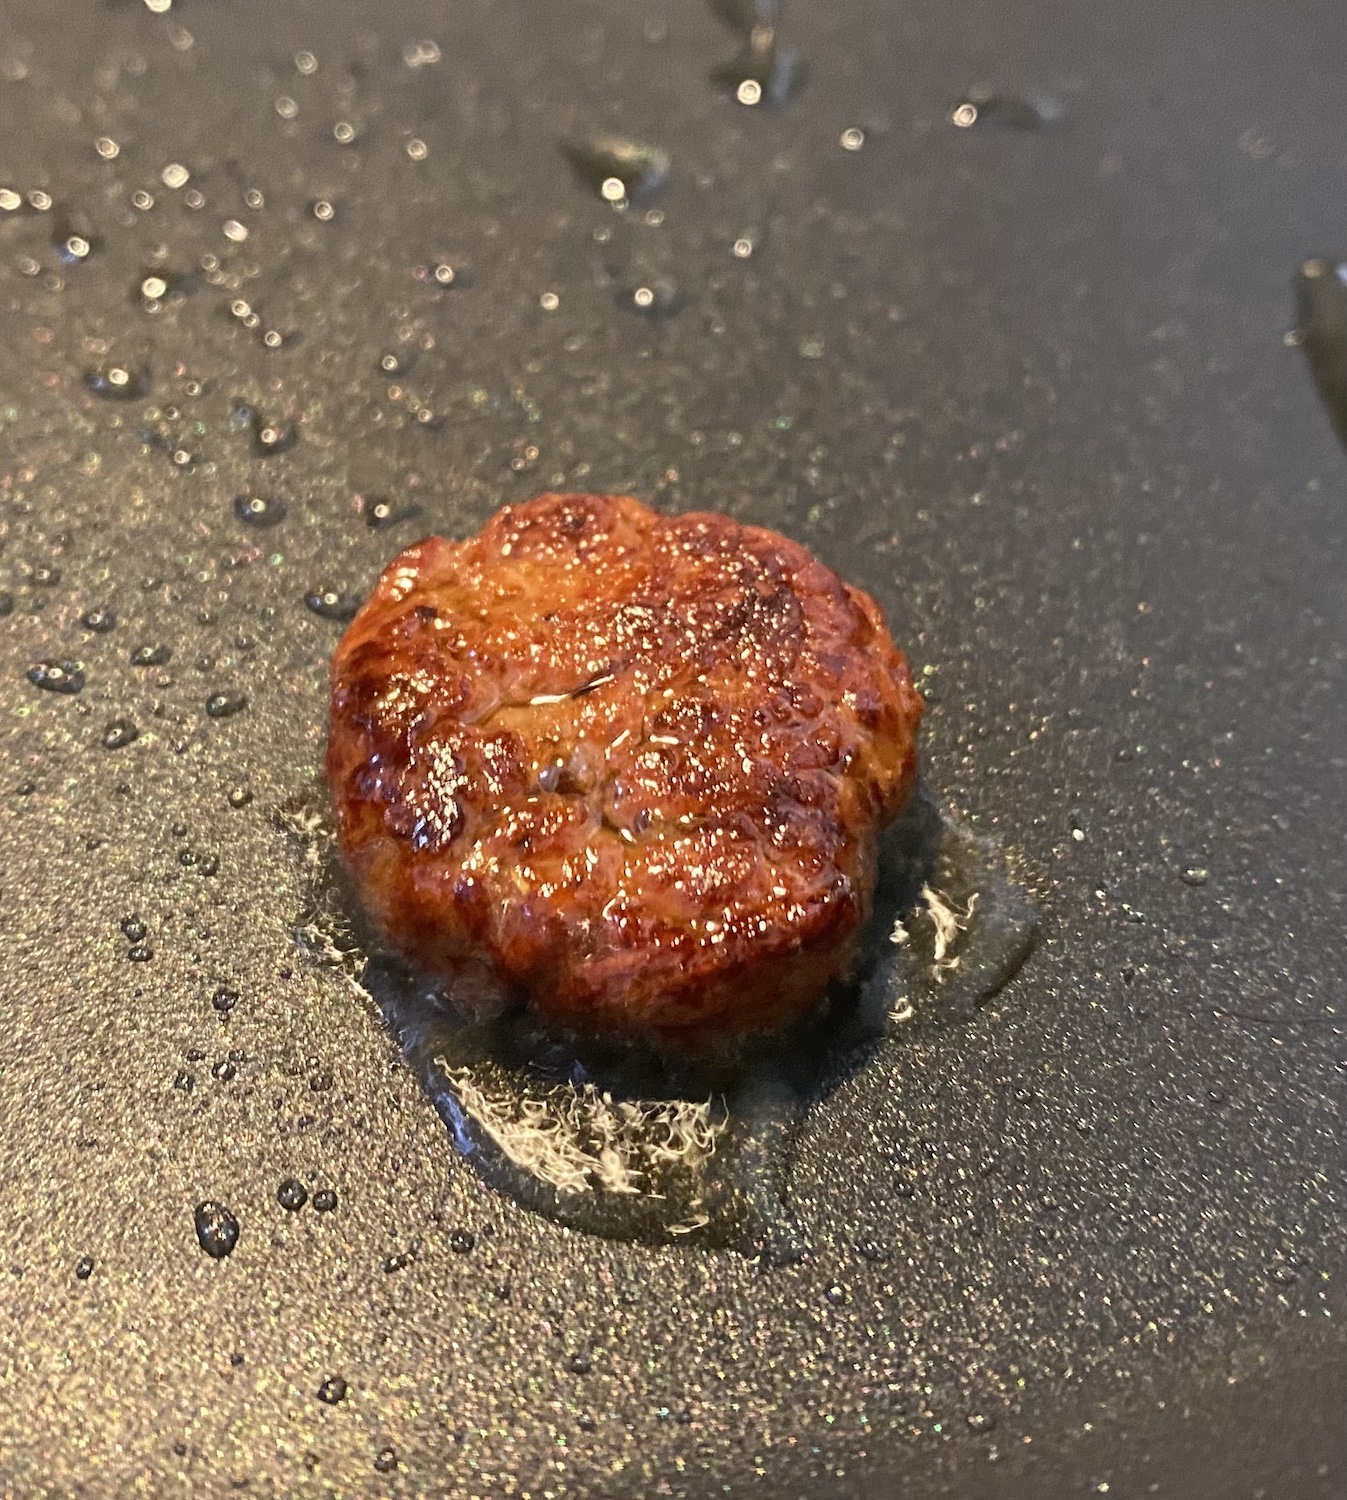 A small, rounded reddish mass that looks like a meat patty sitting in a frying pan beaded with oil